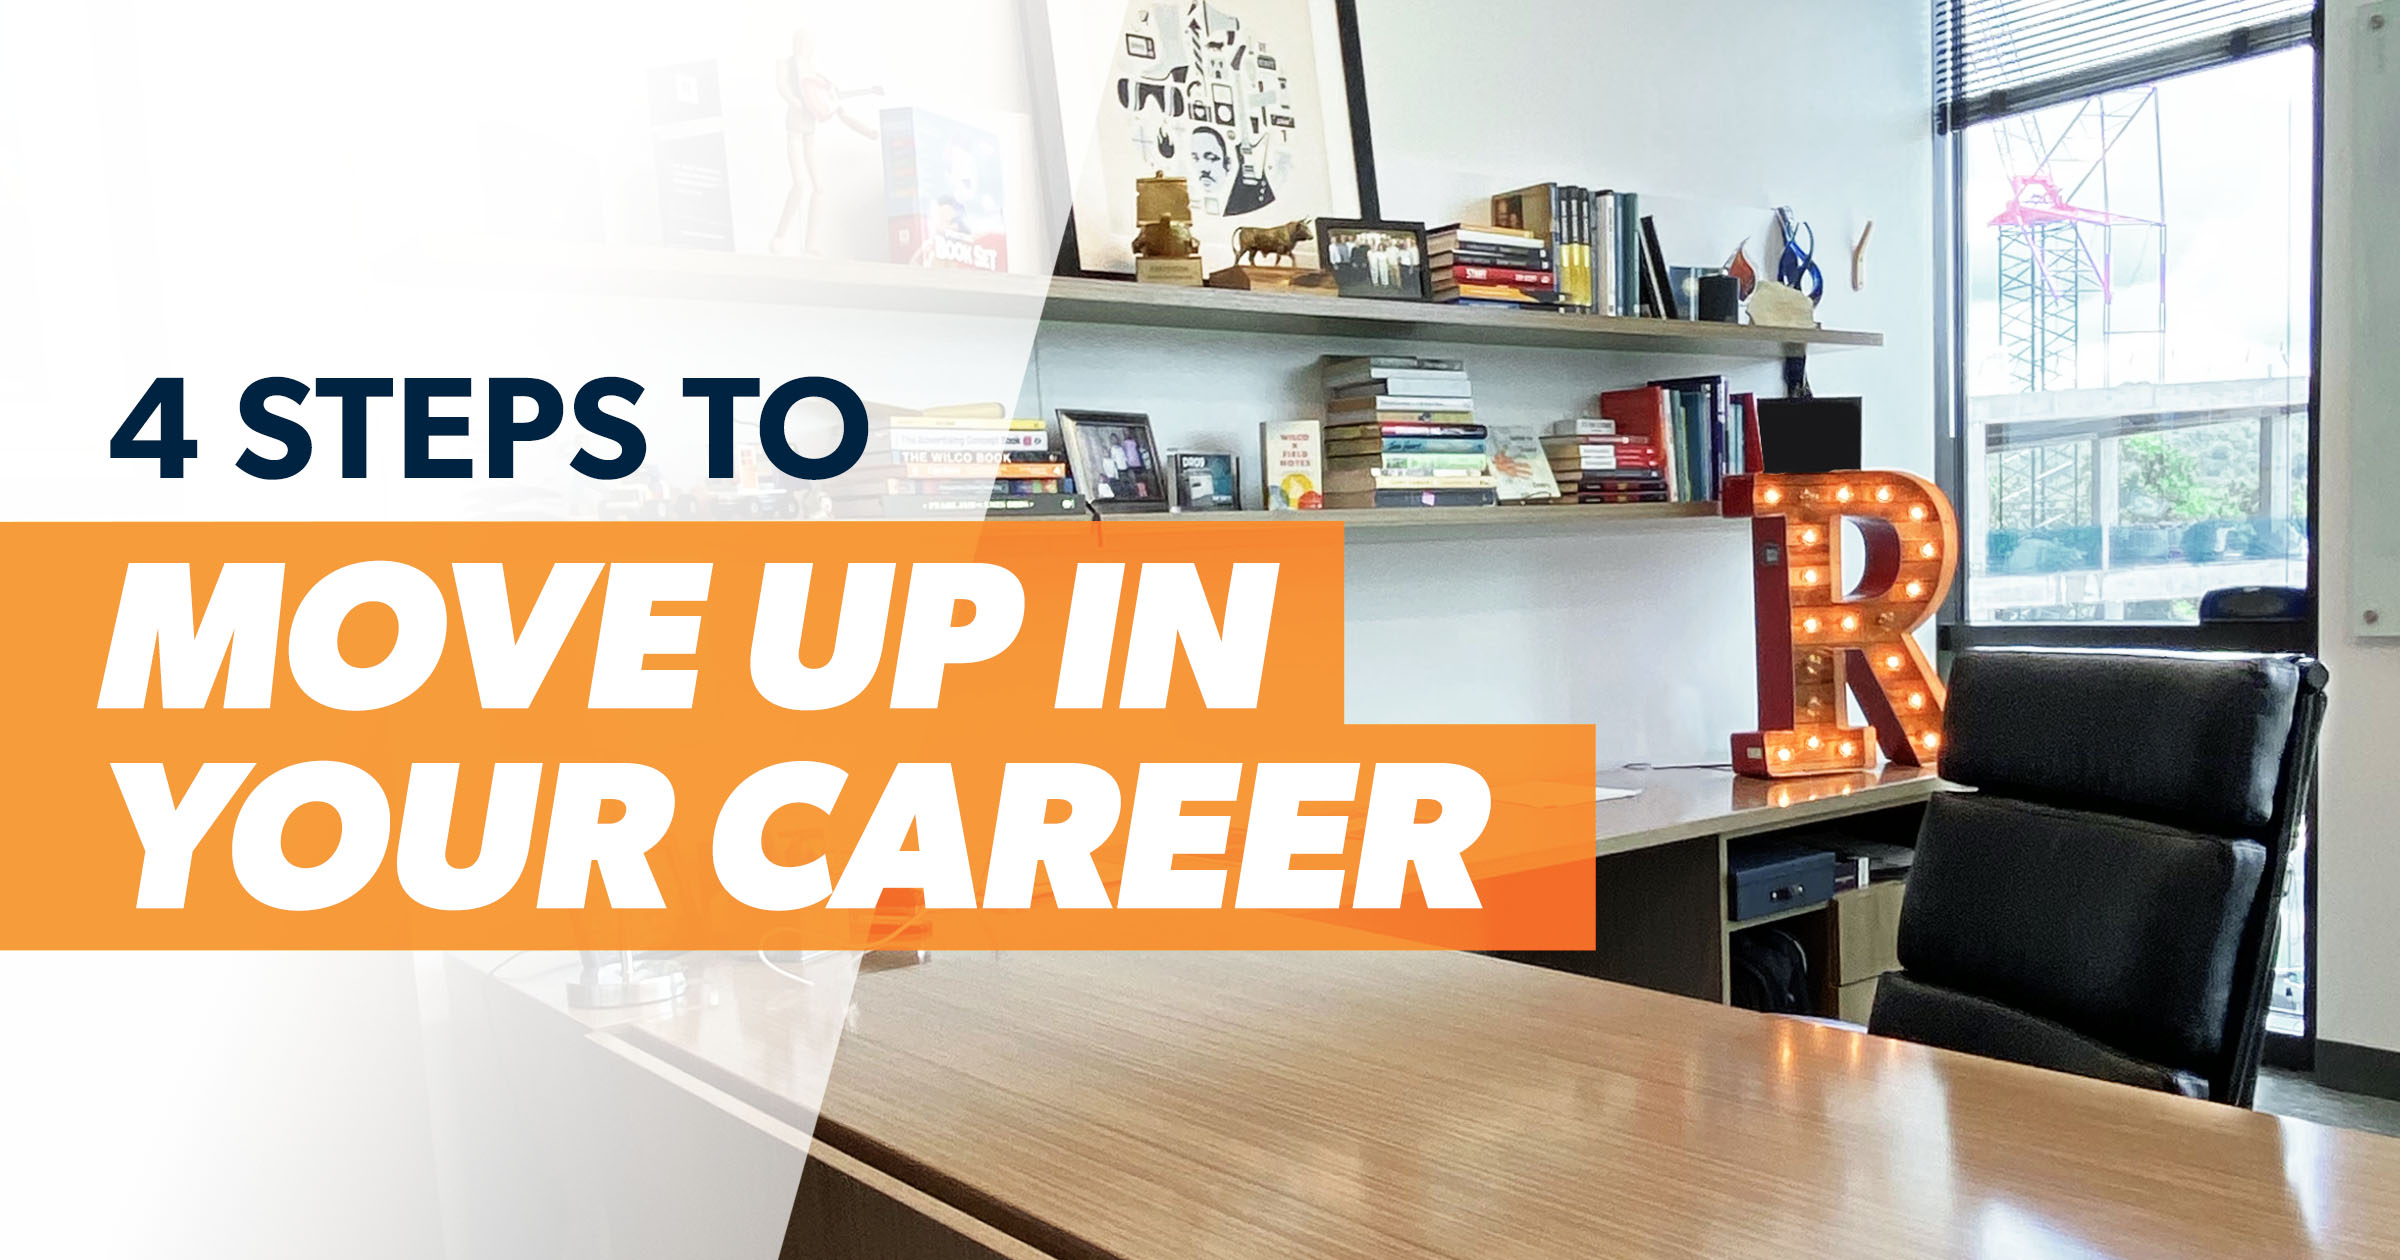 4 Steps to Move Up in Your Career